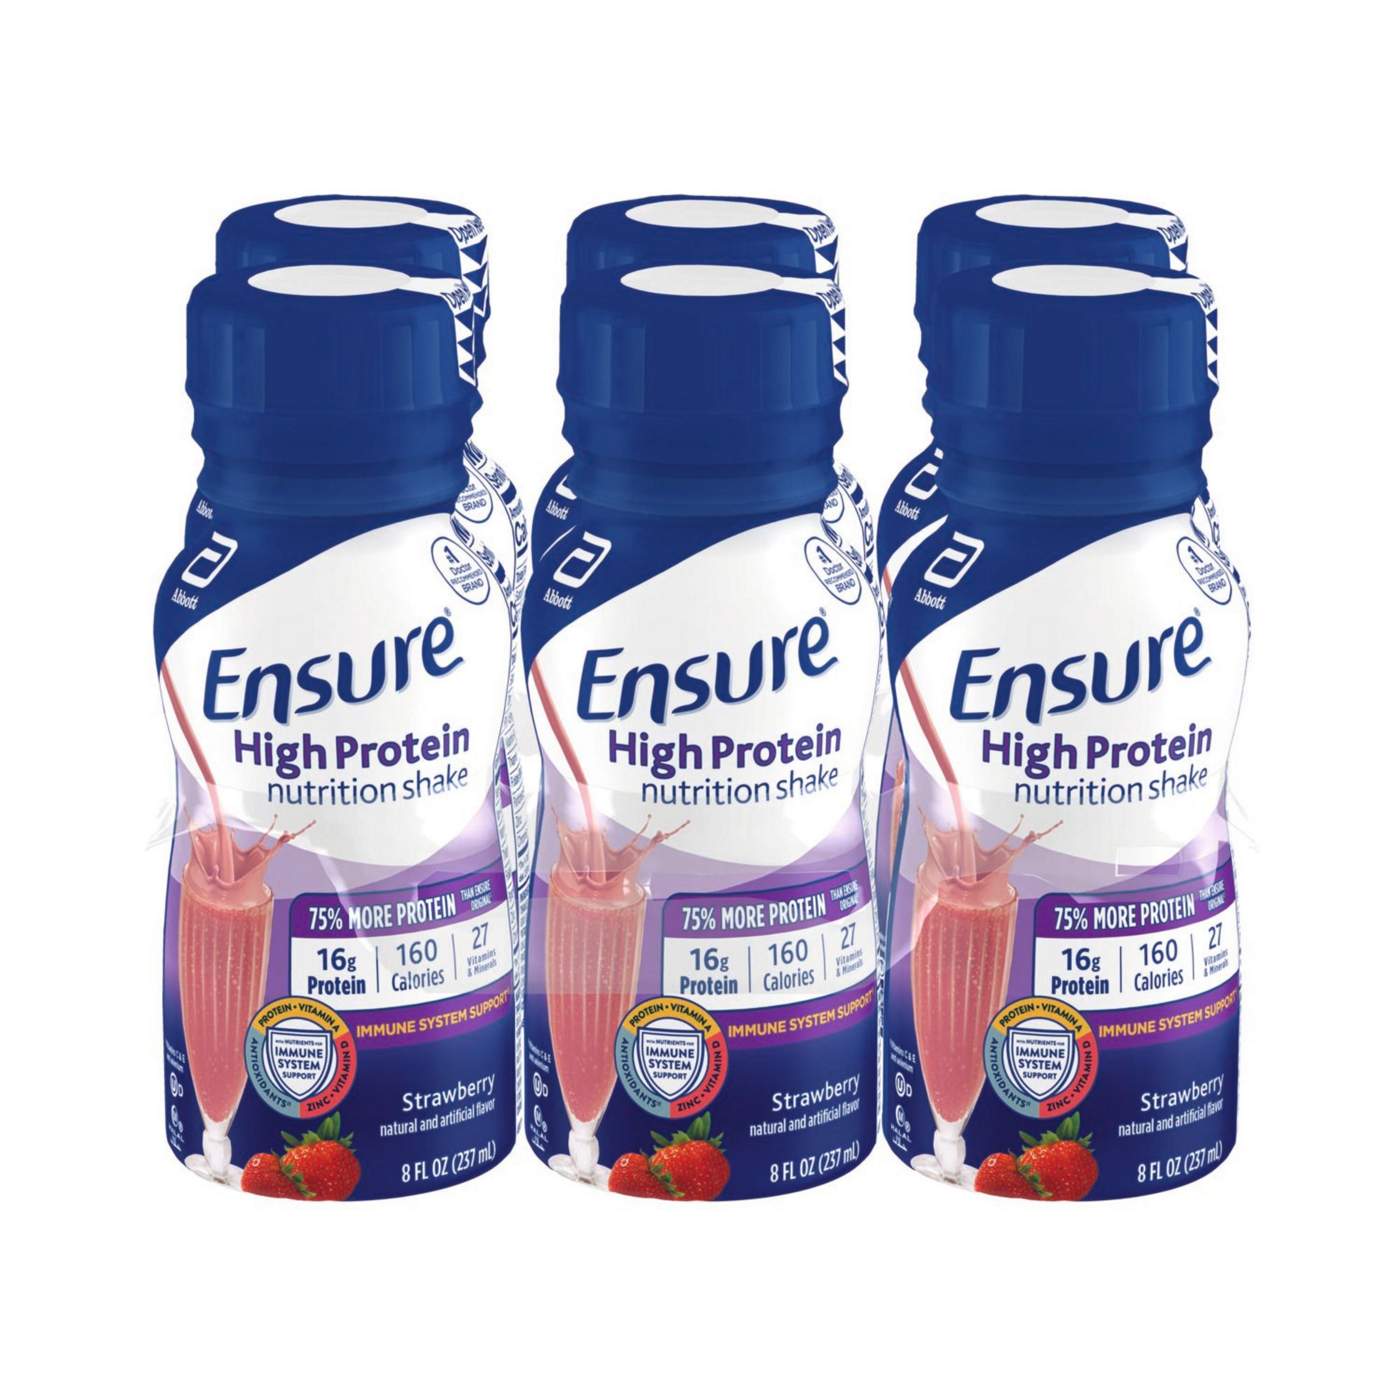 Ensure High Protein Nutrition Shake - Strawberry, 6 pk; image 7 of 11